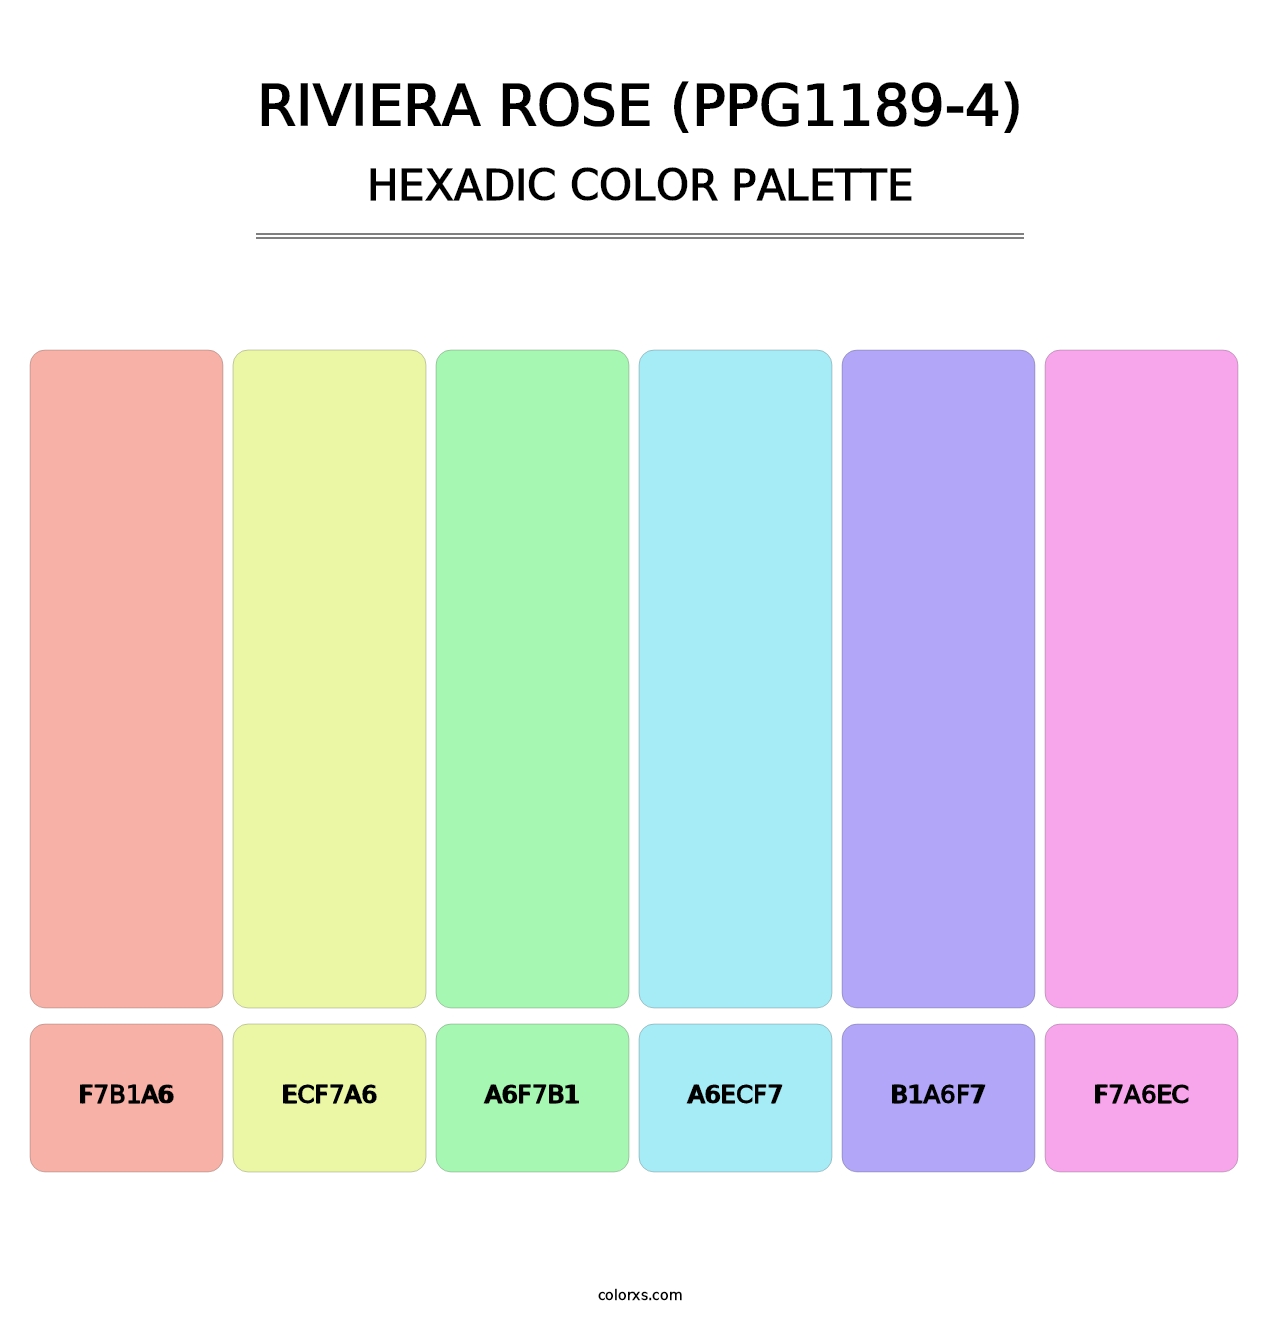 Riviera Rose (PPG1189-4) - Hexadic Color Palette